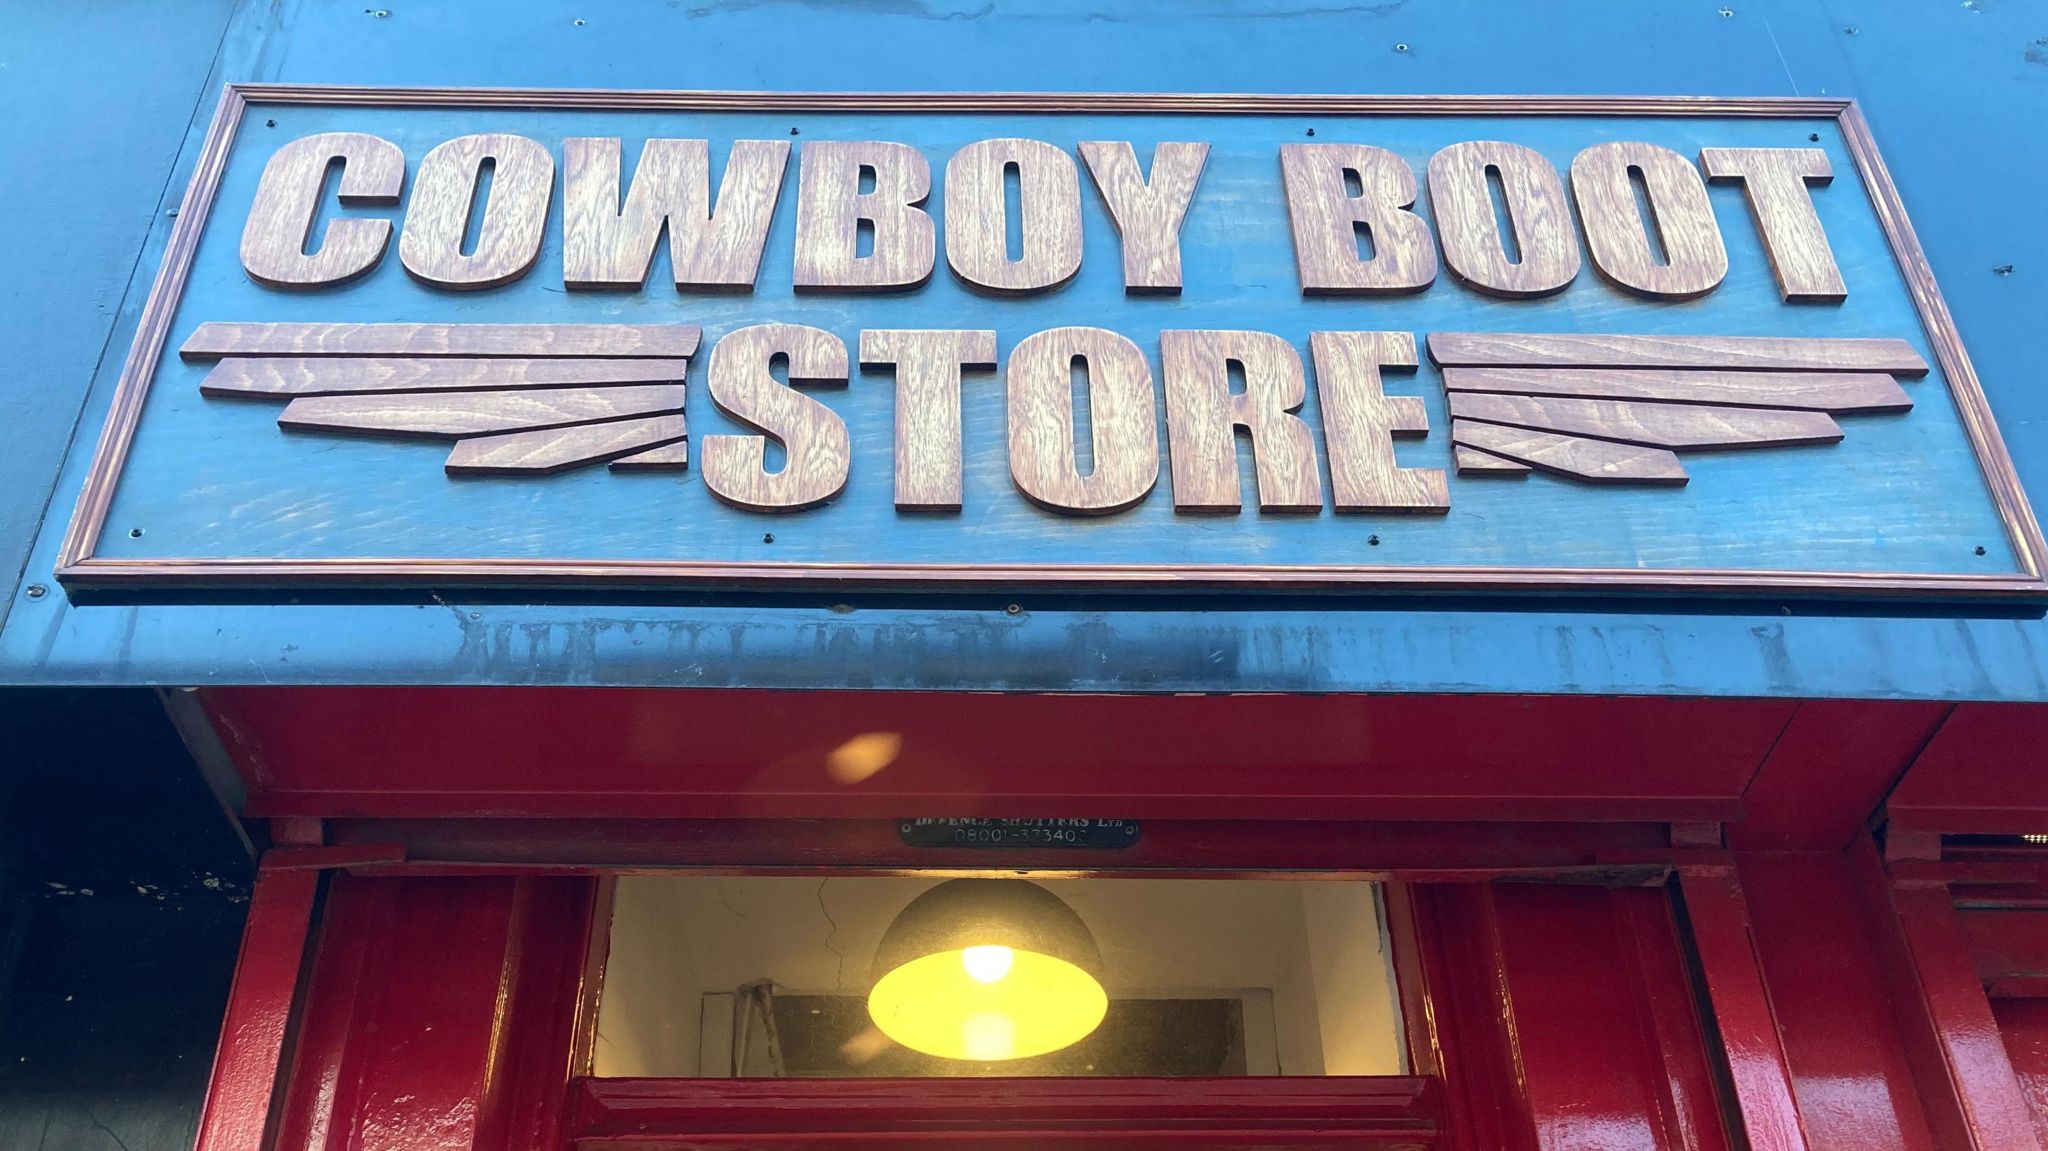 Blue shop sign displaying the words Cowboy Boot Store